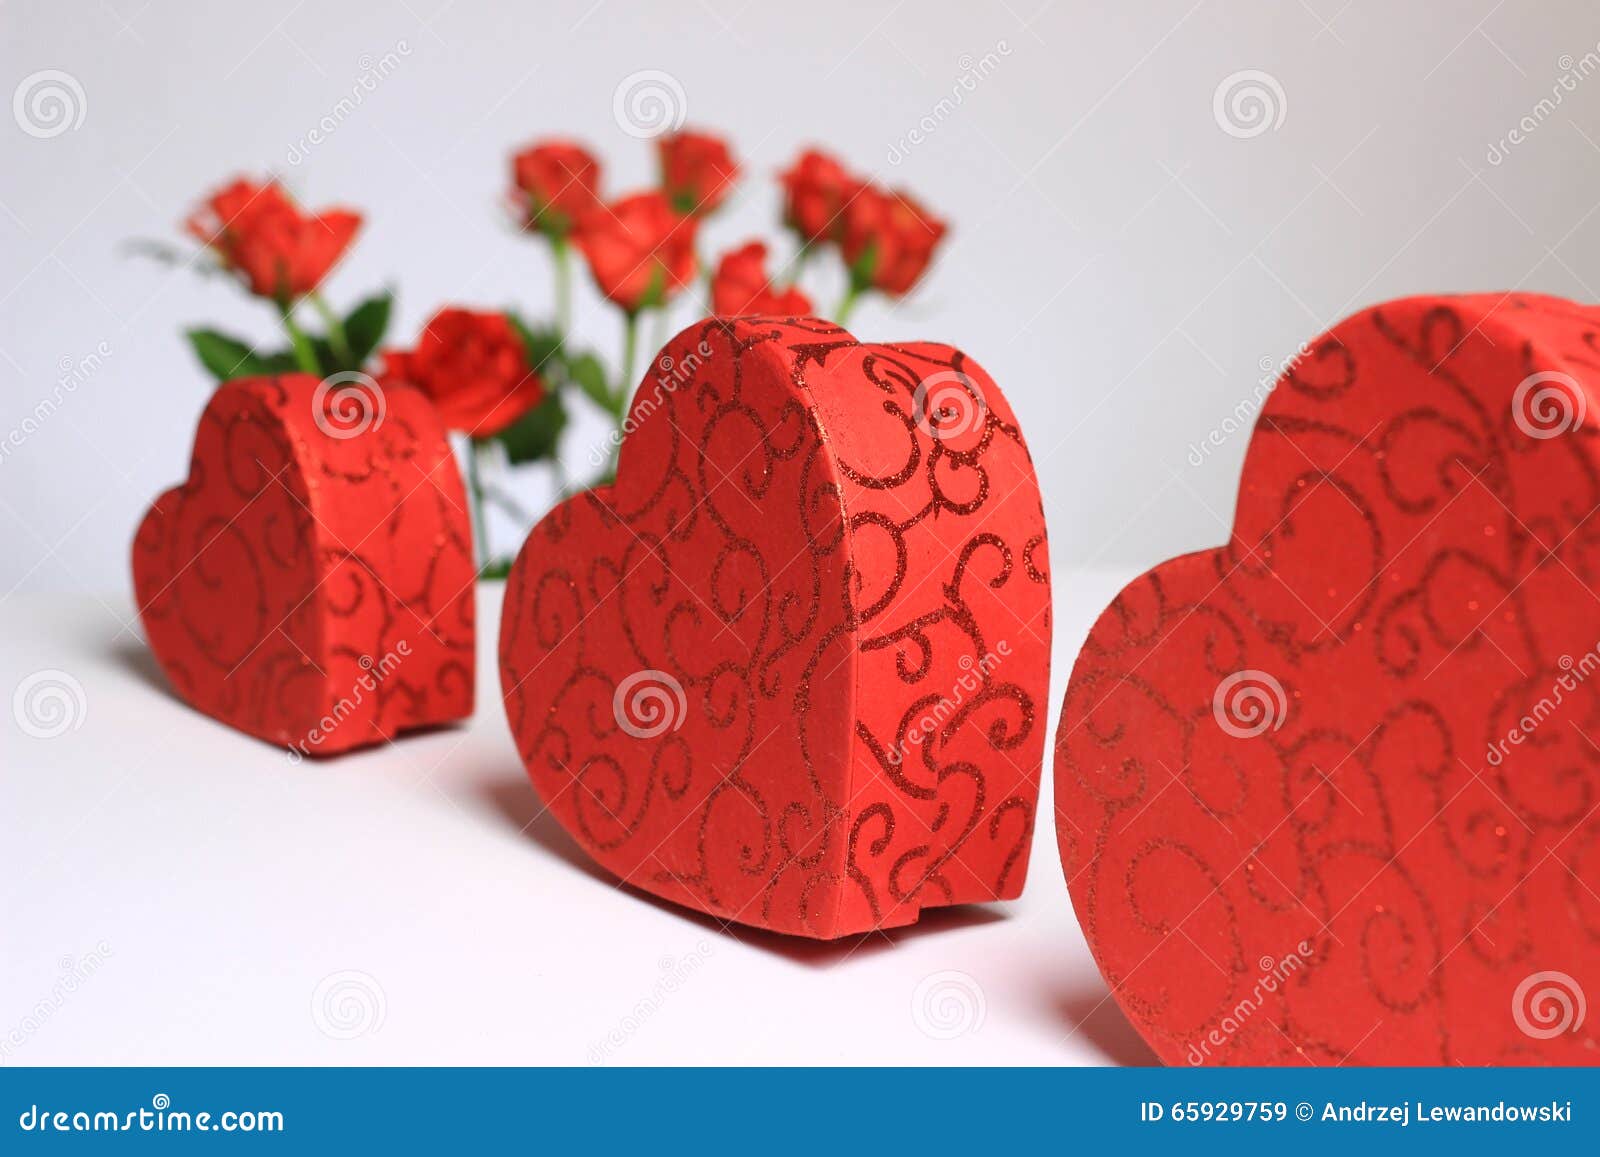 Hearts with flowers on the valentine s day